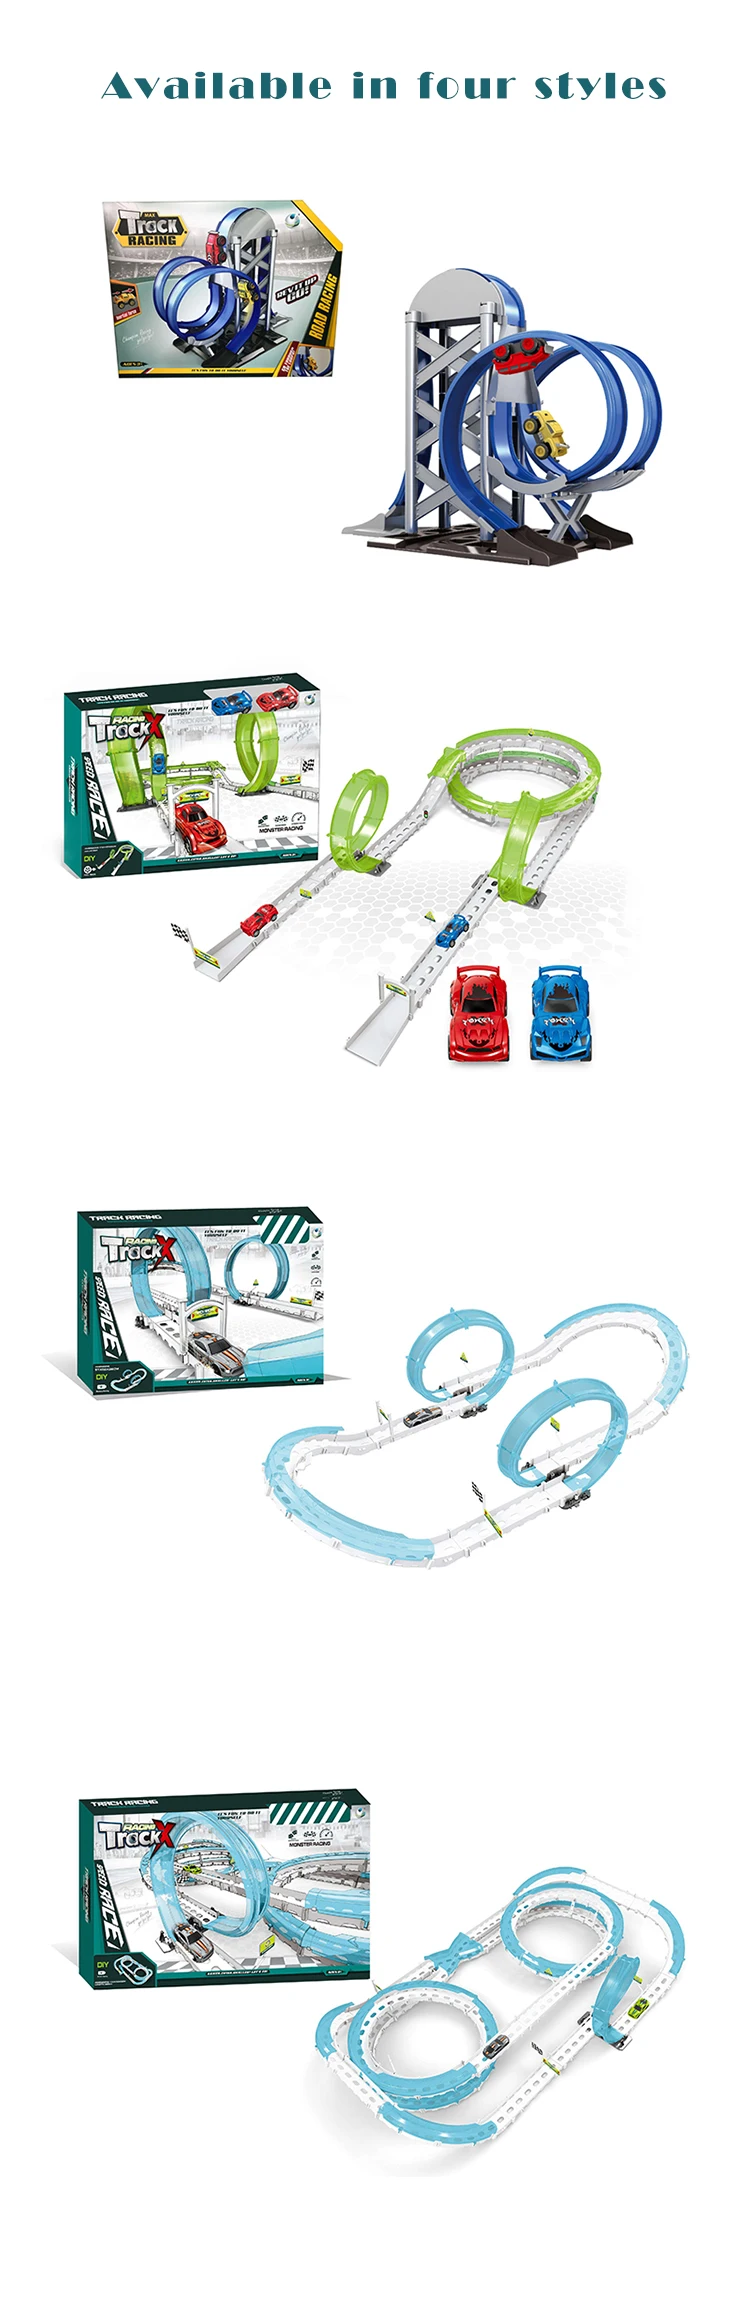 Kids educational DIY toy electric racing track toy with 2 electric cars